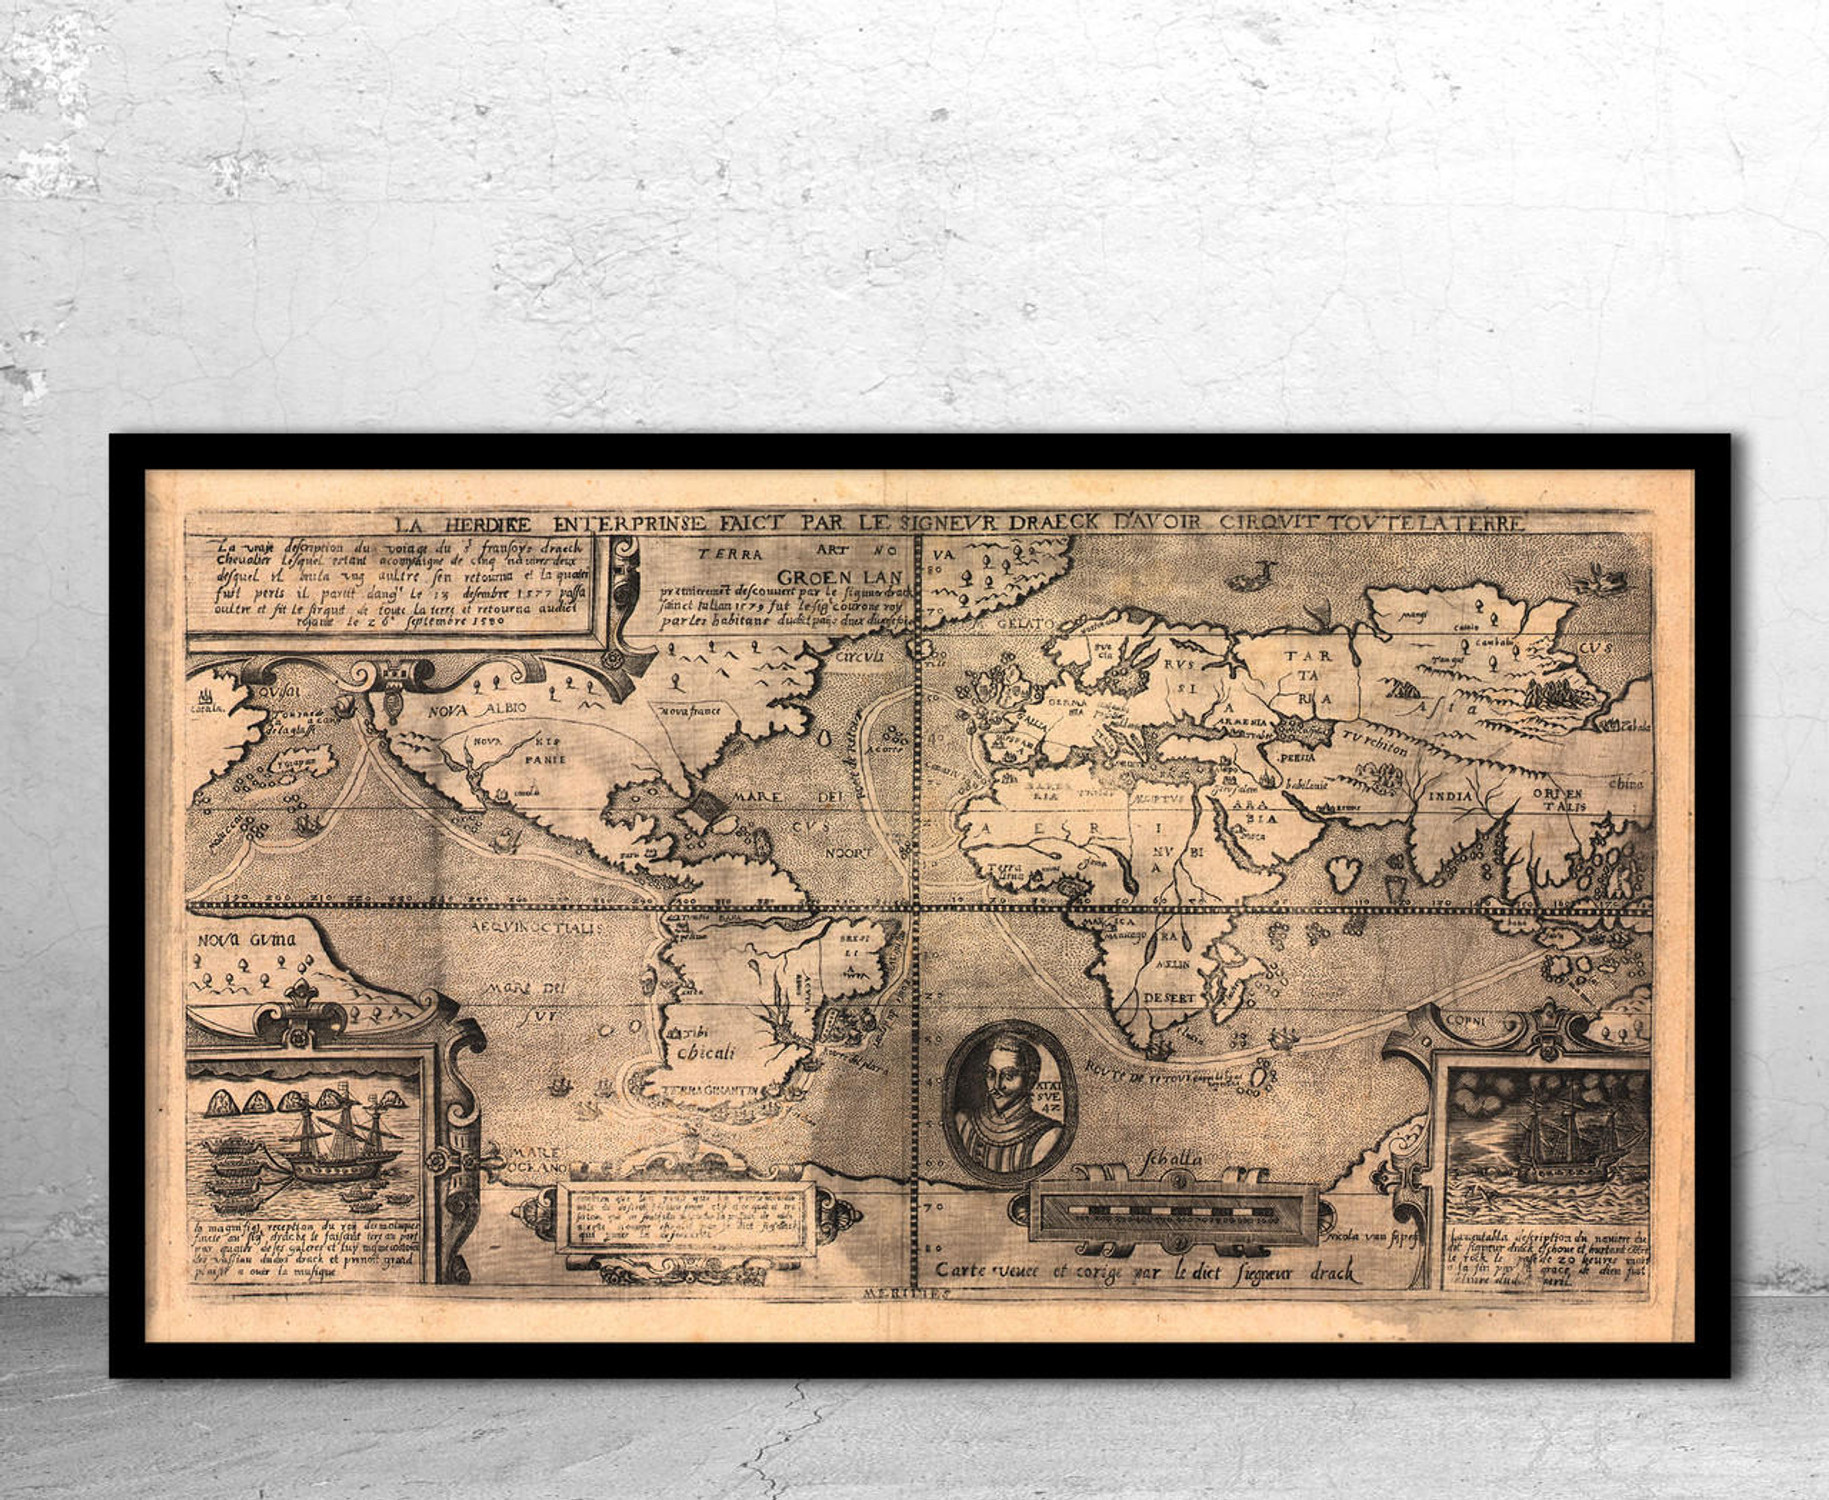 Historic Old World Map - 1581 by Nicola van Sype, image 1, World Maps Online